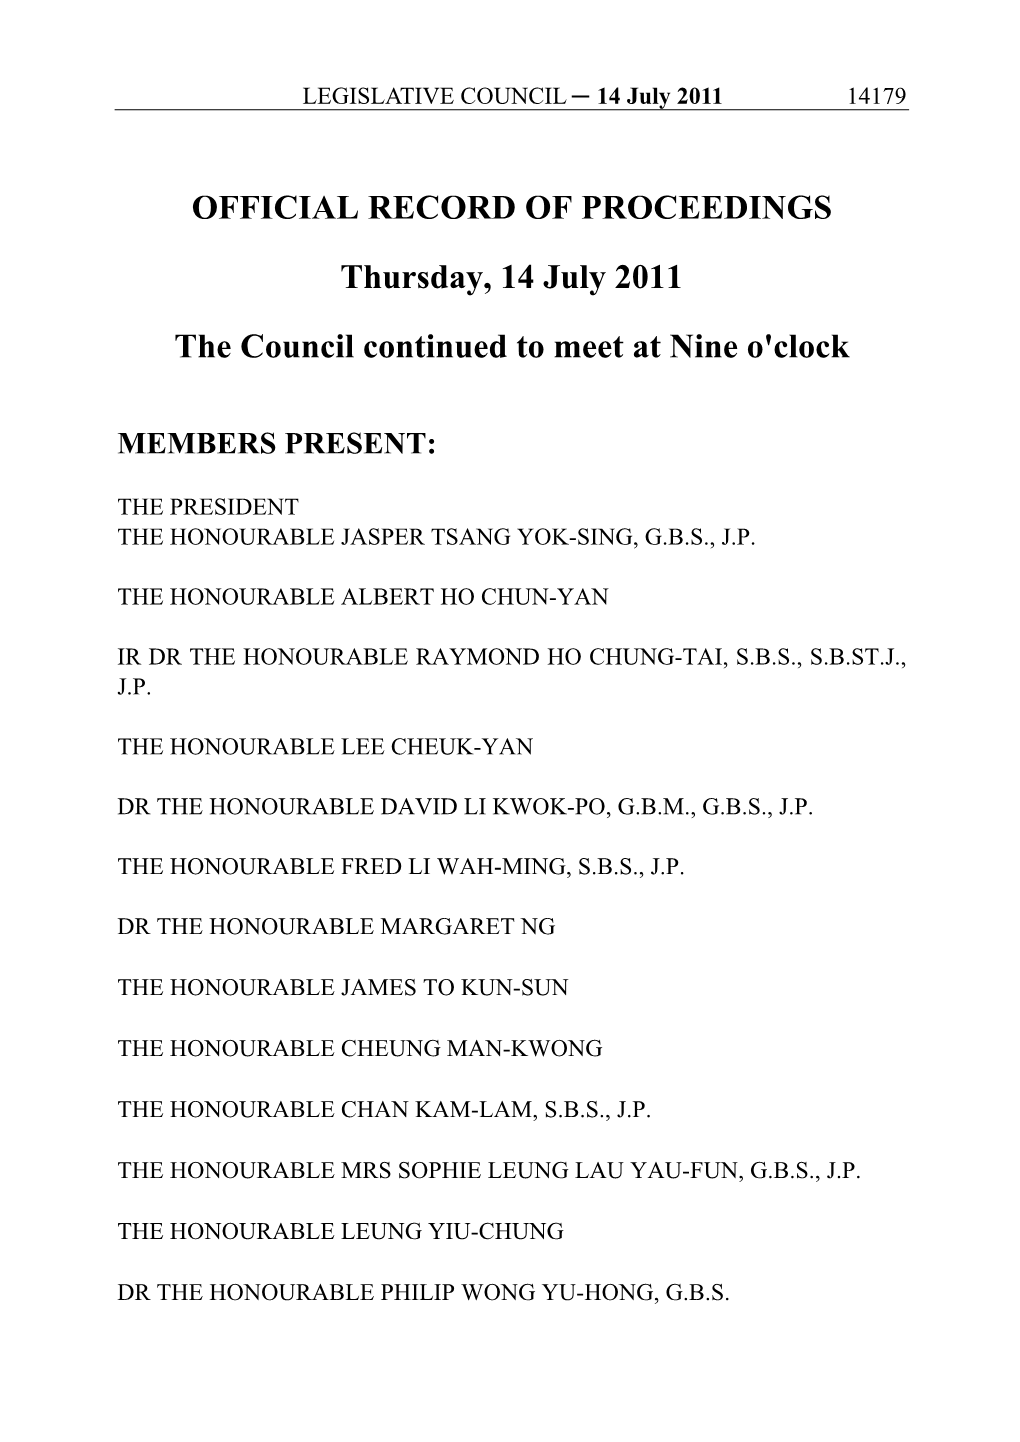 OFFICIAL RECORD of PROCEEDINGS Thursday, 14 July